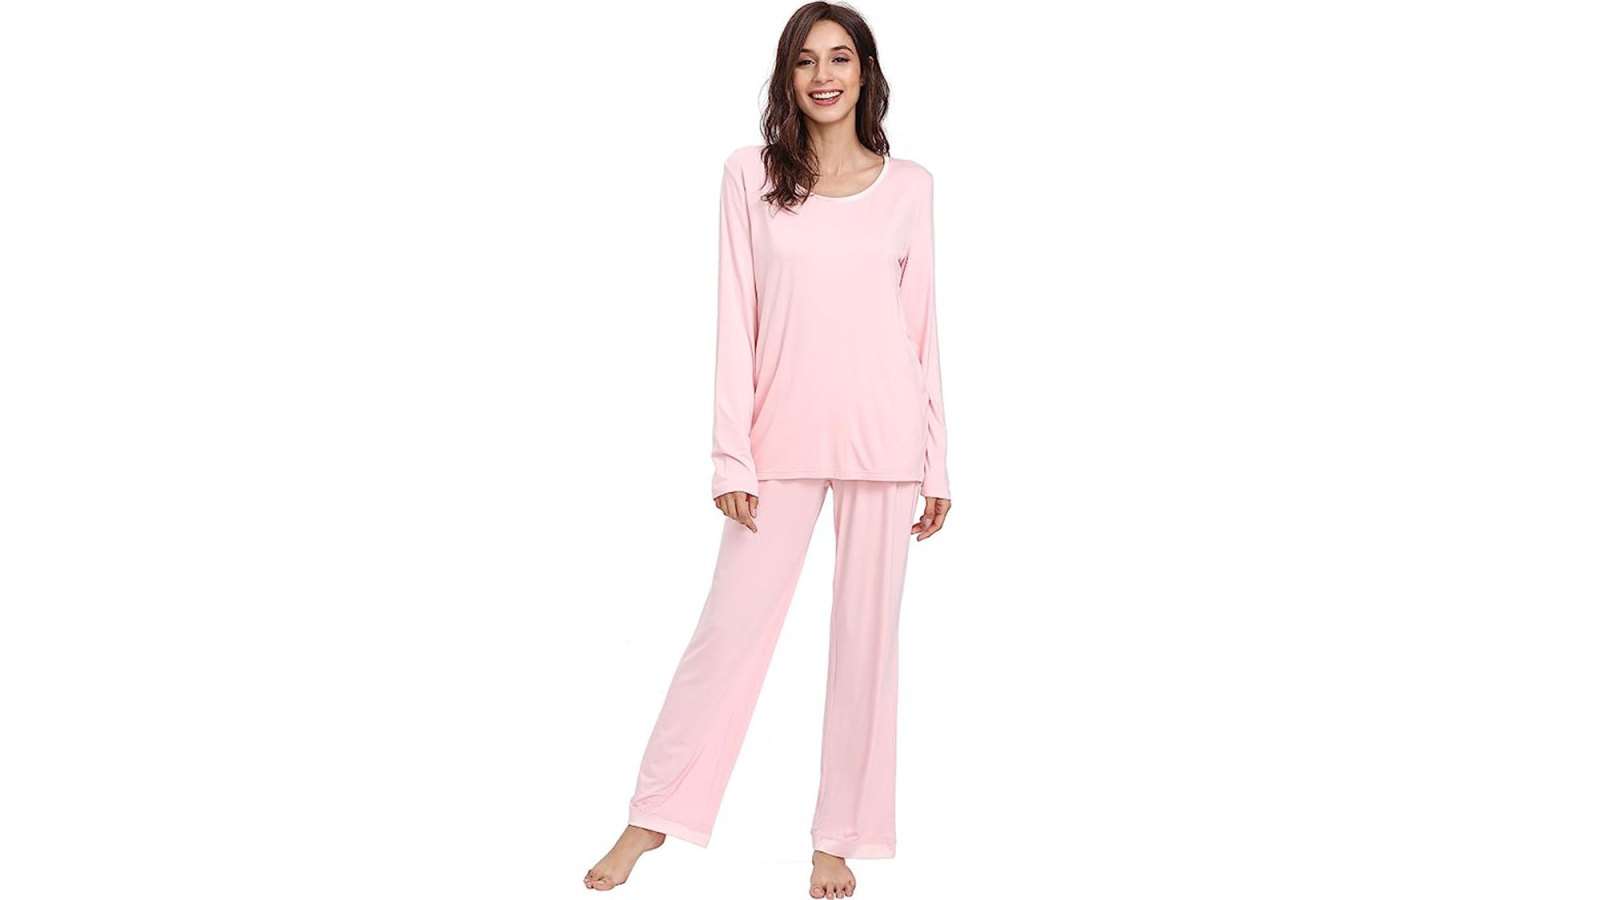 Shop These Soft Pajamas That Keep You Cool While You Sleep